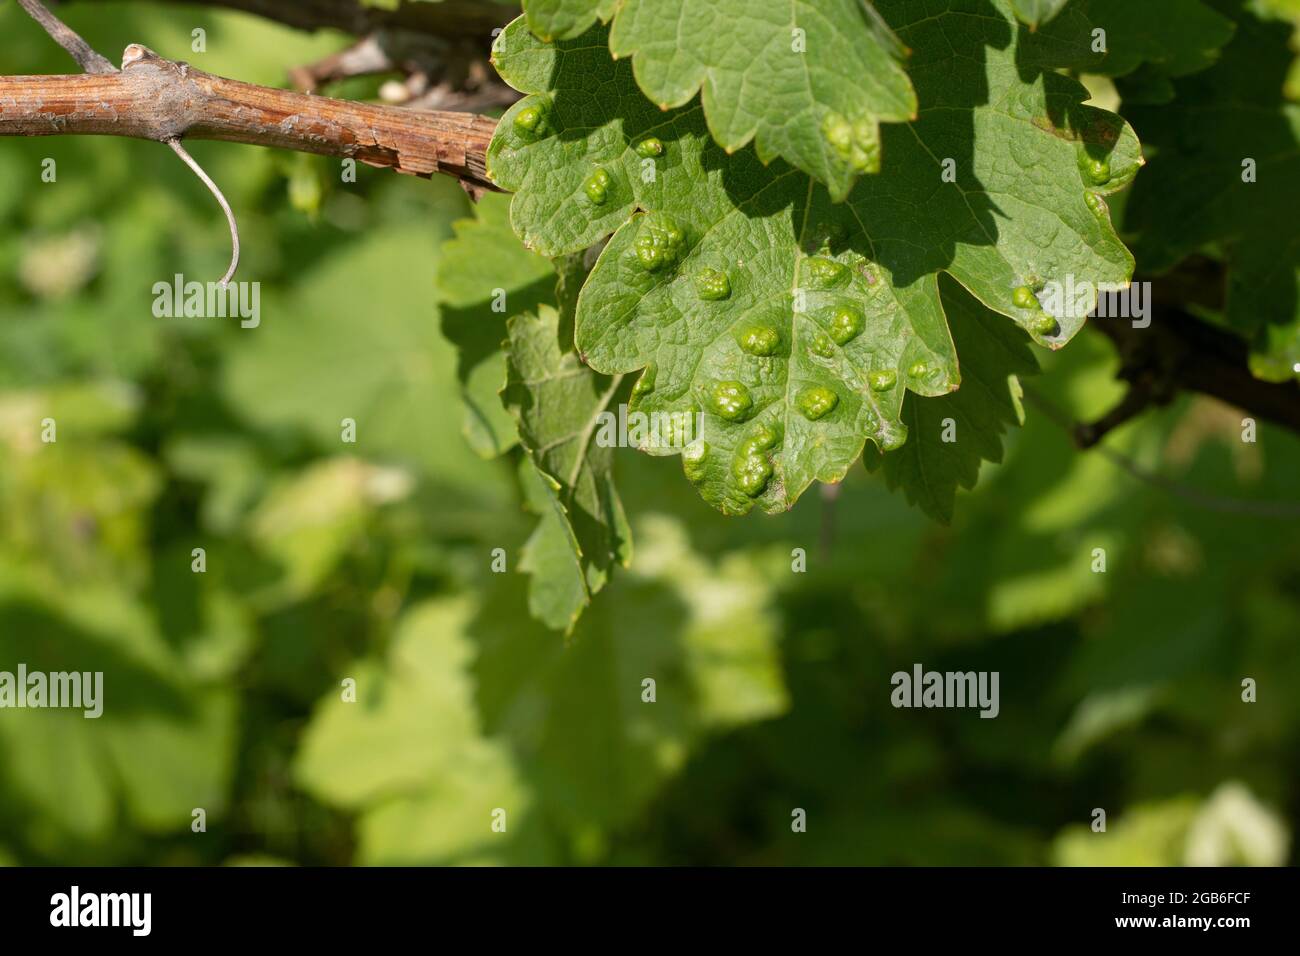 Blisters on a grape leaf damaged by spider mites in a vineyard. Vineyard diseases Stock Photo